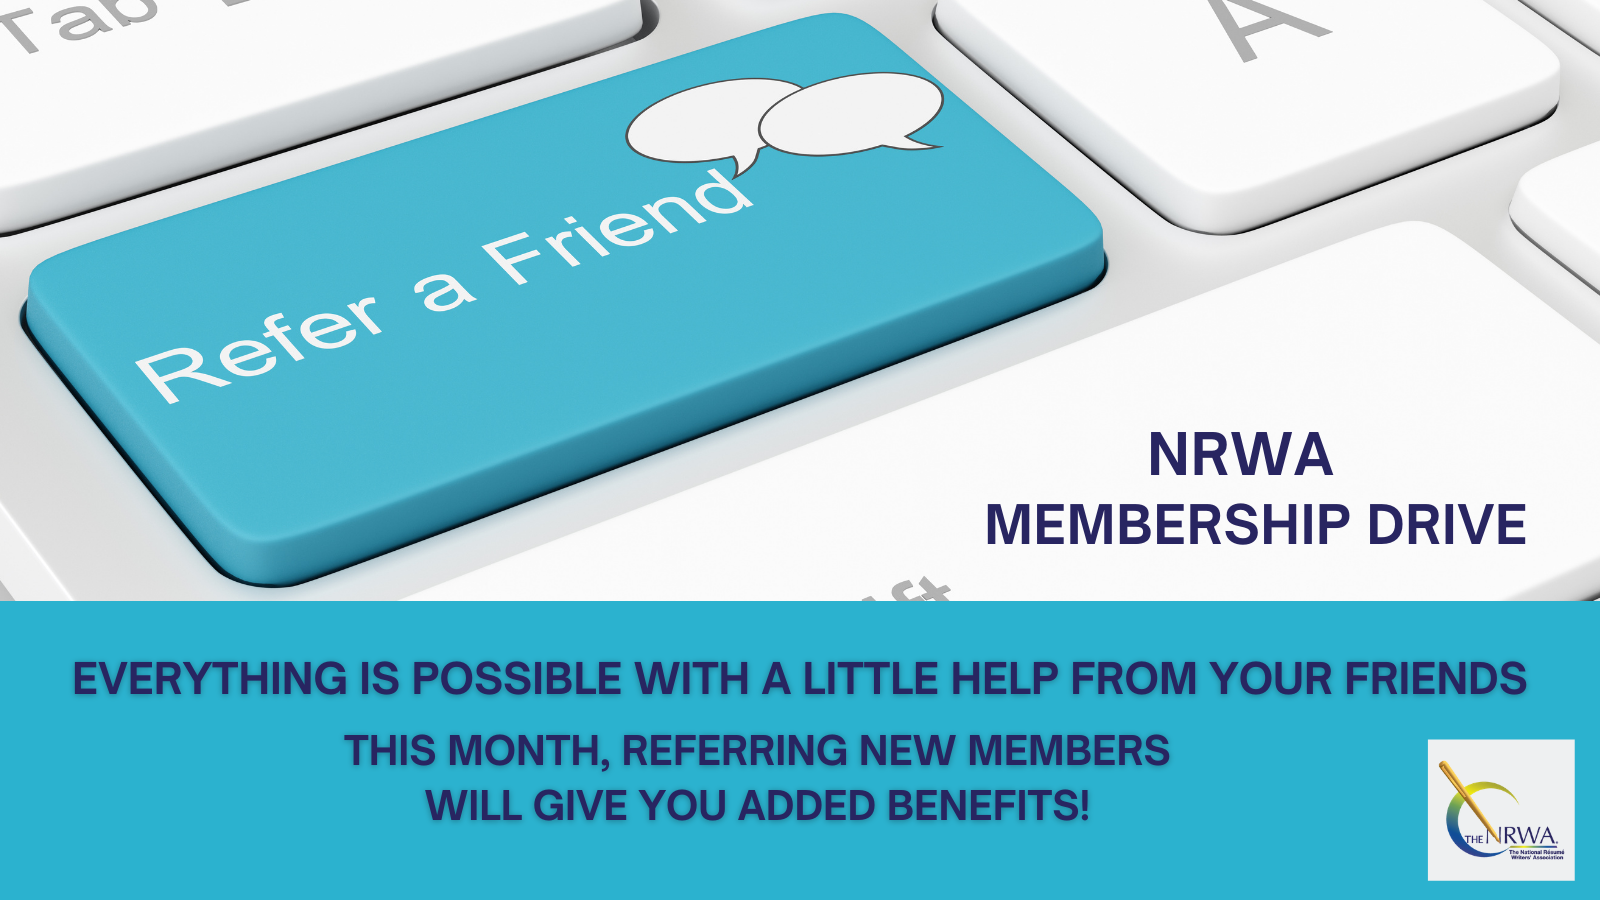 NRWA Membership Drive - Refer a Friend - Everything is possible with a little help from your friends. This month, referring new members will give you added benefits!